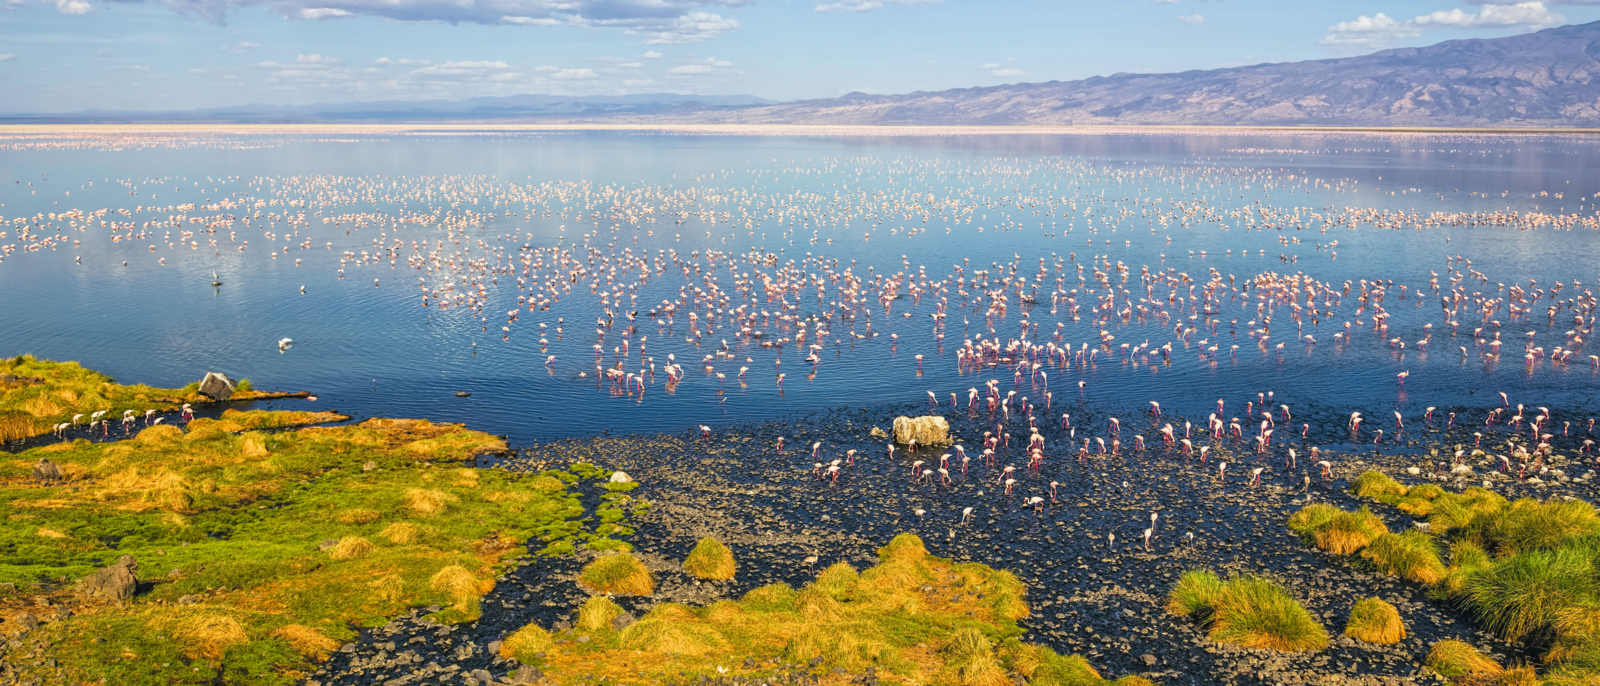 Lake Natron is a salt lake located in northern Tanzania, close to the Kenyan border, in the eastern branch of the East African Rift. The lake is the only regular breeding area in East Africa for the 2.5 million Lesser Flamingoes